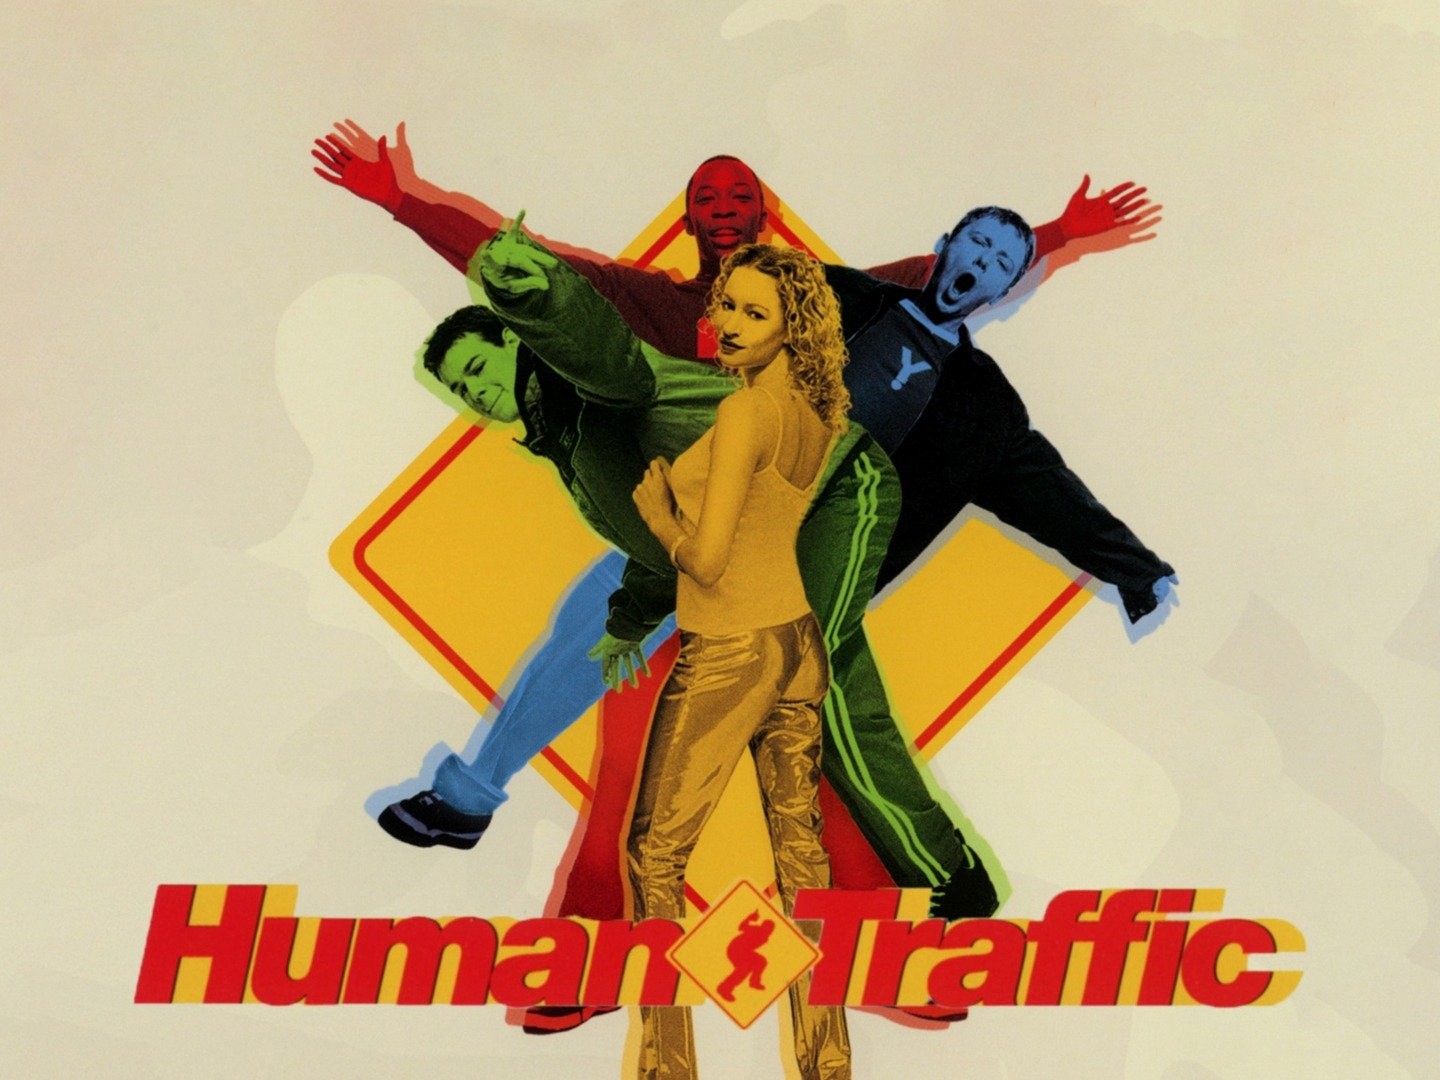 Human Traffic has now been released in 4K